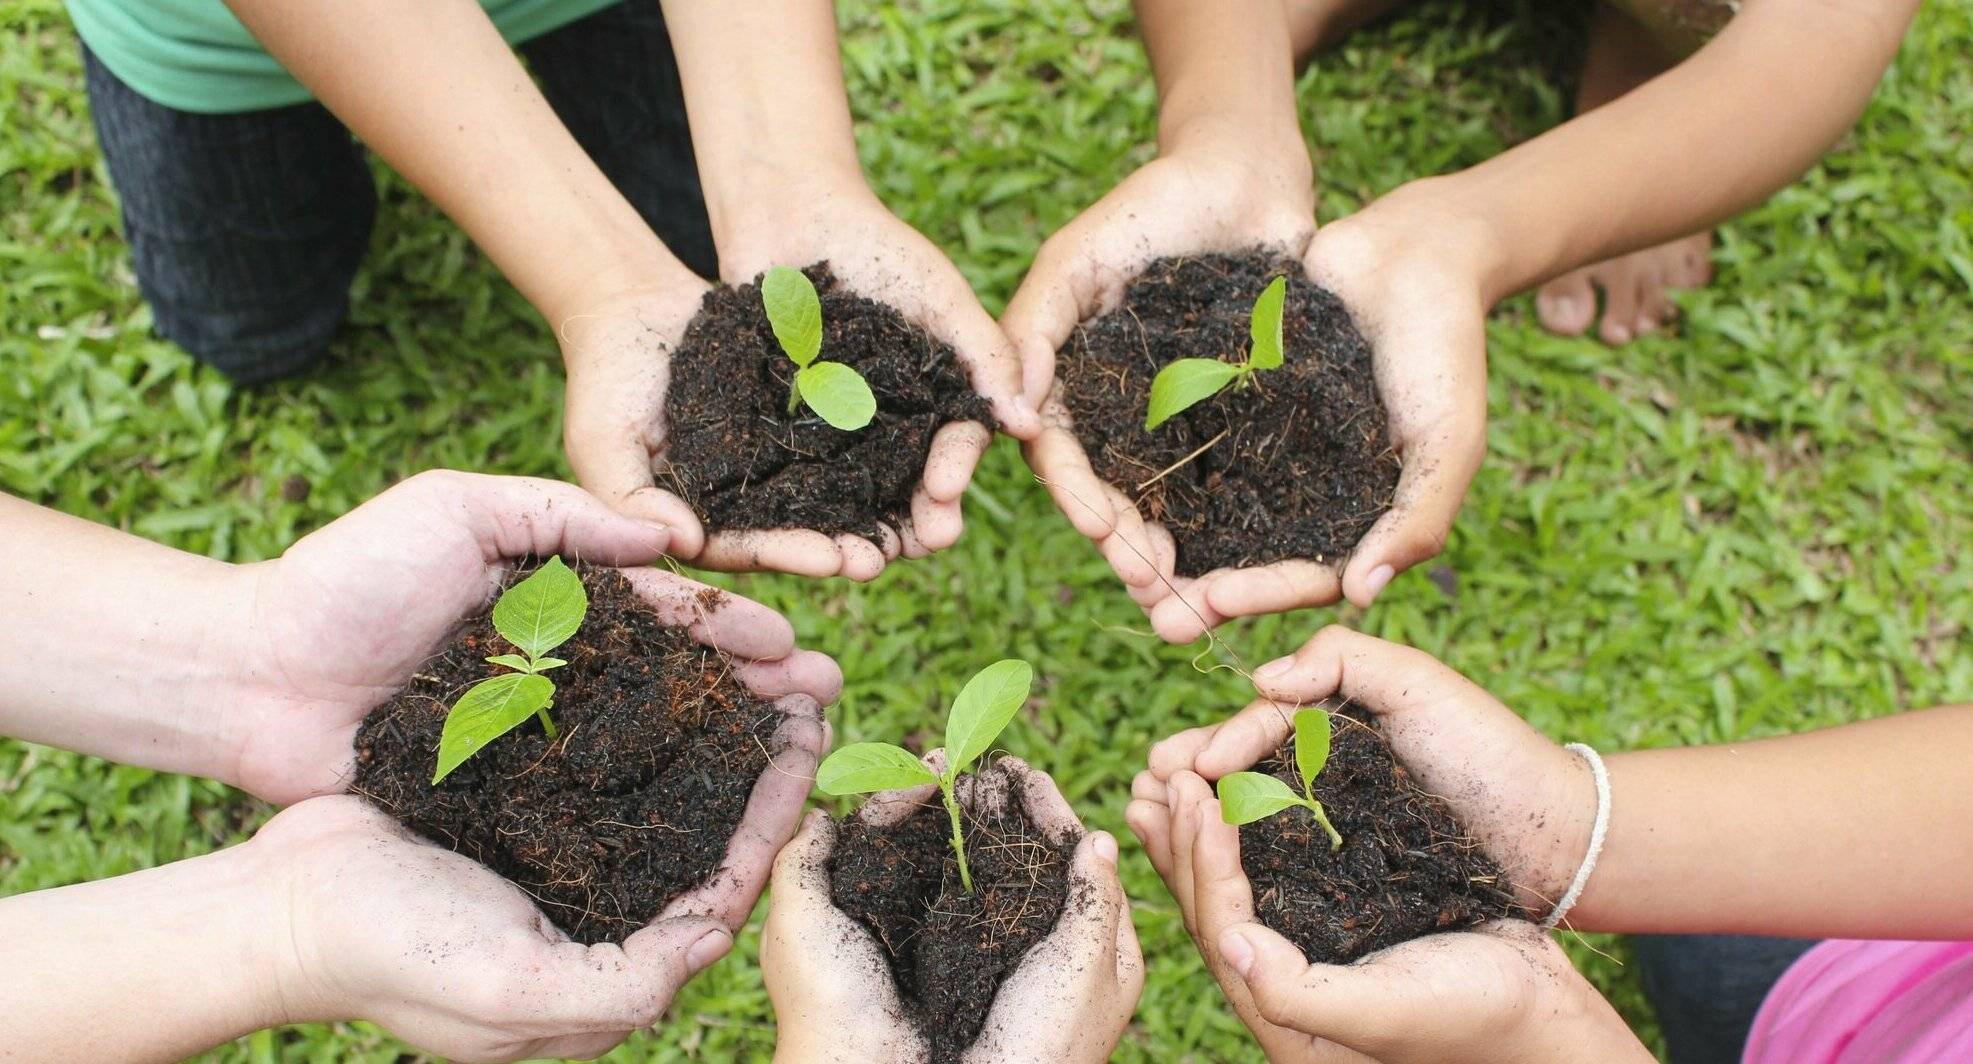  Hands holding sapling in soil surface with green grass background. 